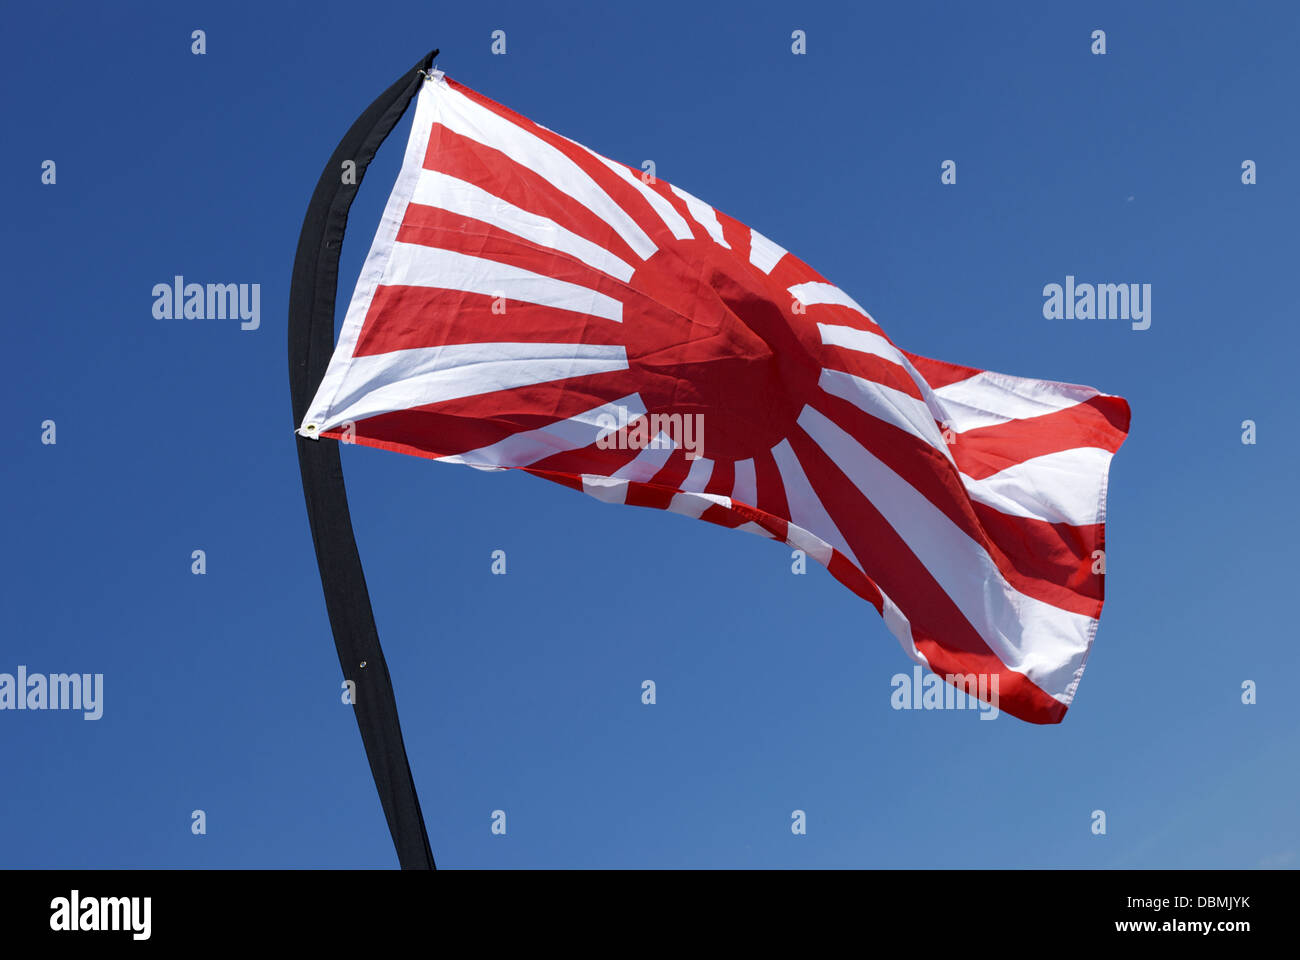 Rising sun flag wavering and fluttering movement on blue sky on windy day Stock Photo